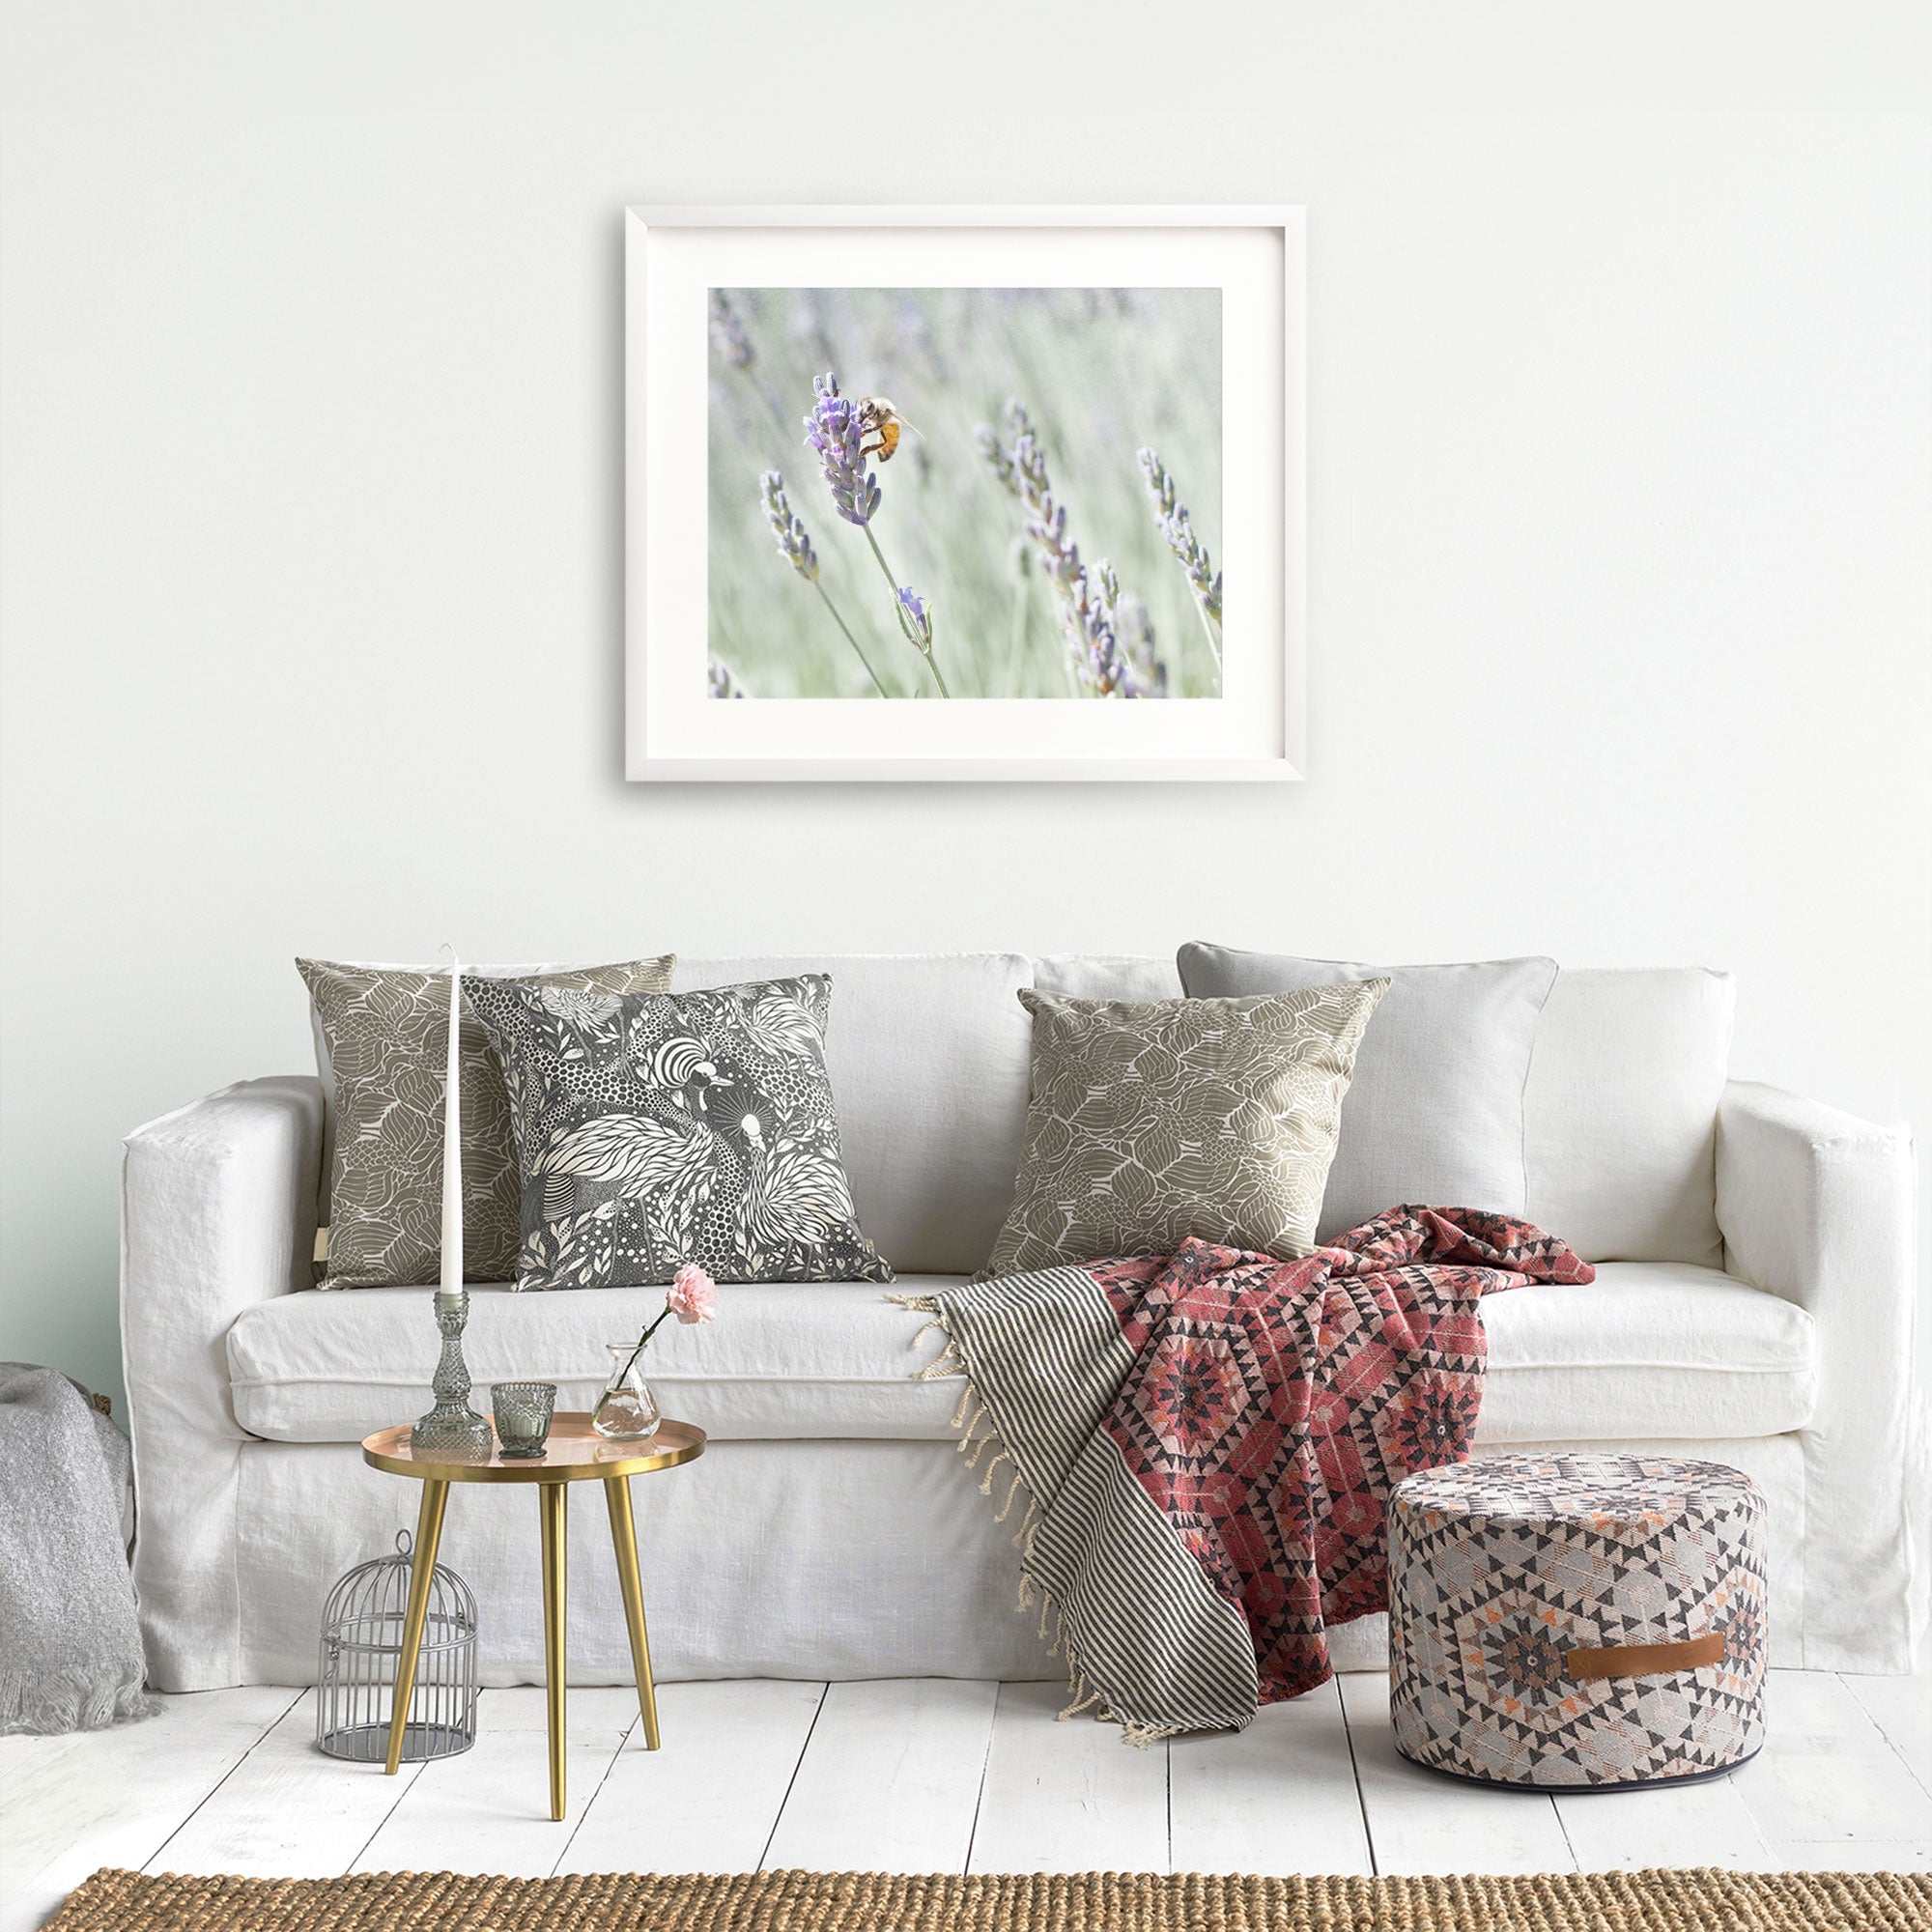 A cozy living room featuring a white sofa adorned with stylish patterned cushions, a red throw blanket, and a small round table. A framed Offley Green Rustic Floral Print, 'Lavender for Bees', printed on archival photographic paper.